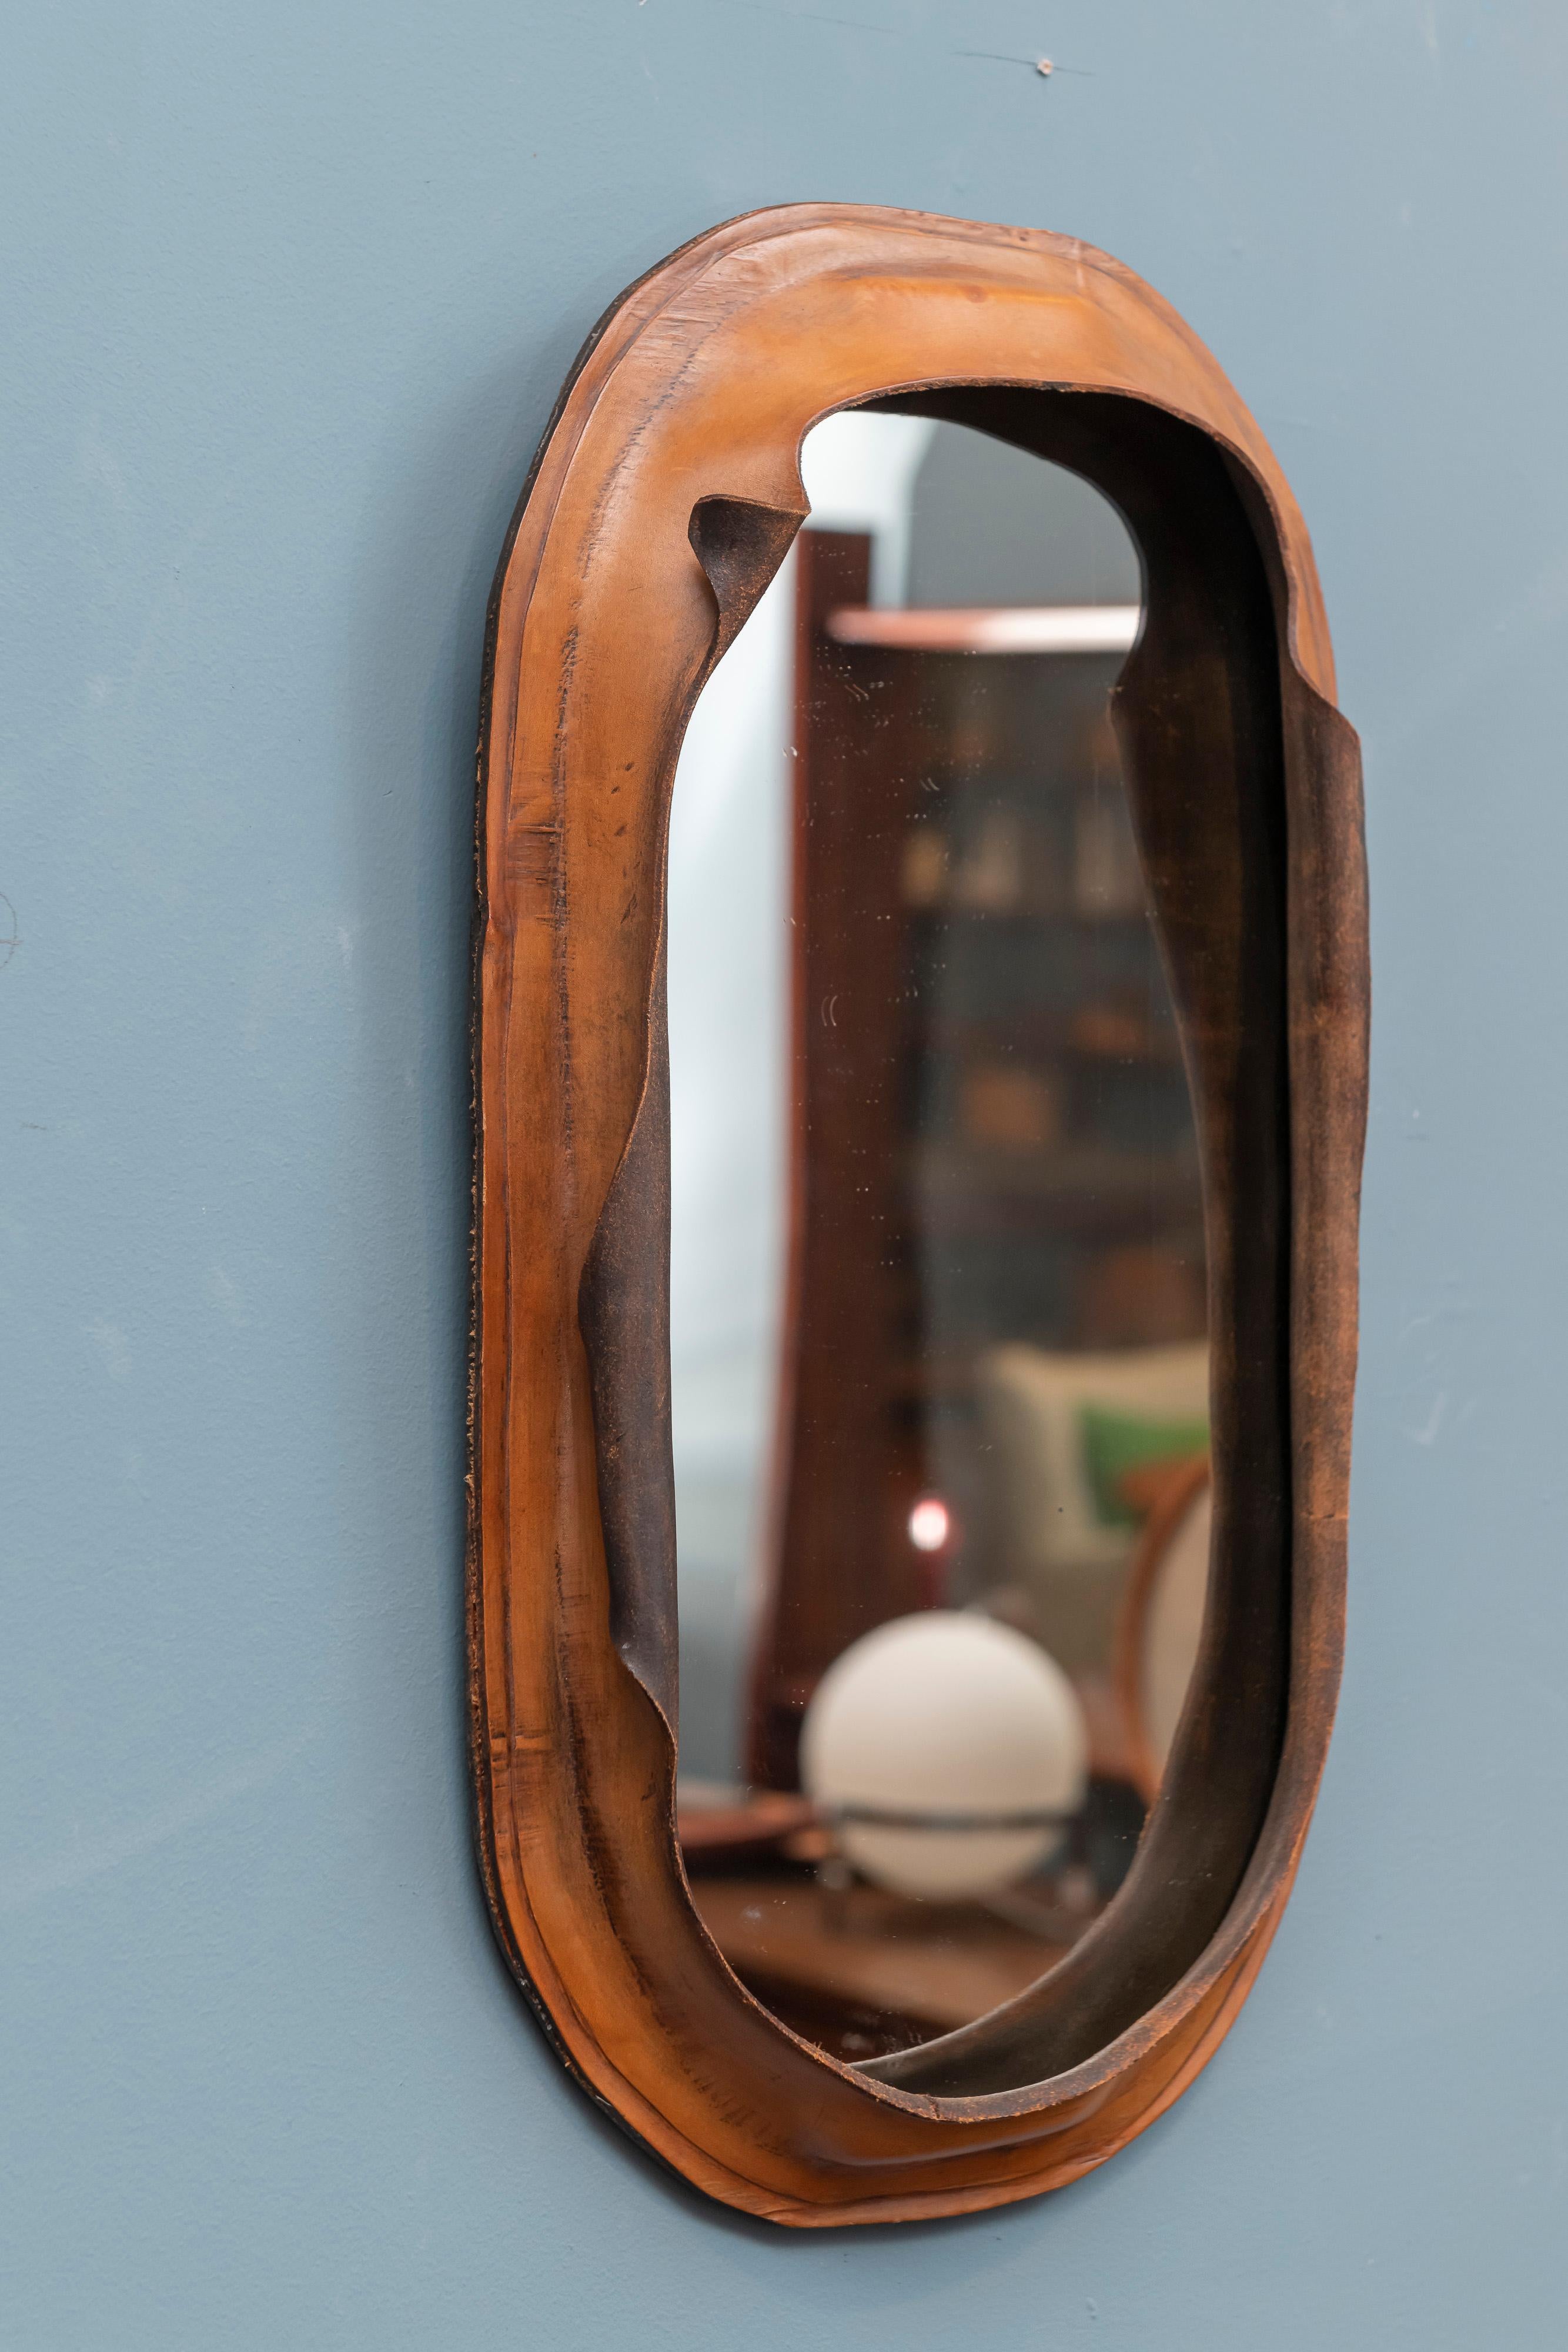 Freeform leather wall mirror, interesting design most likely from the 1970s and either French or Italian.